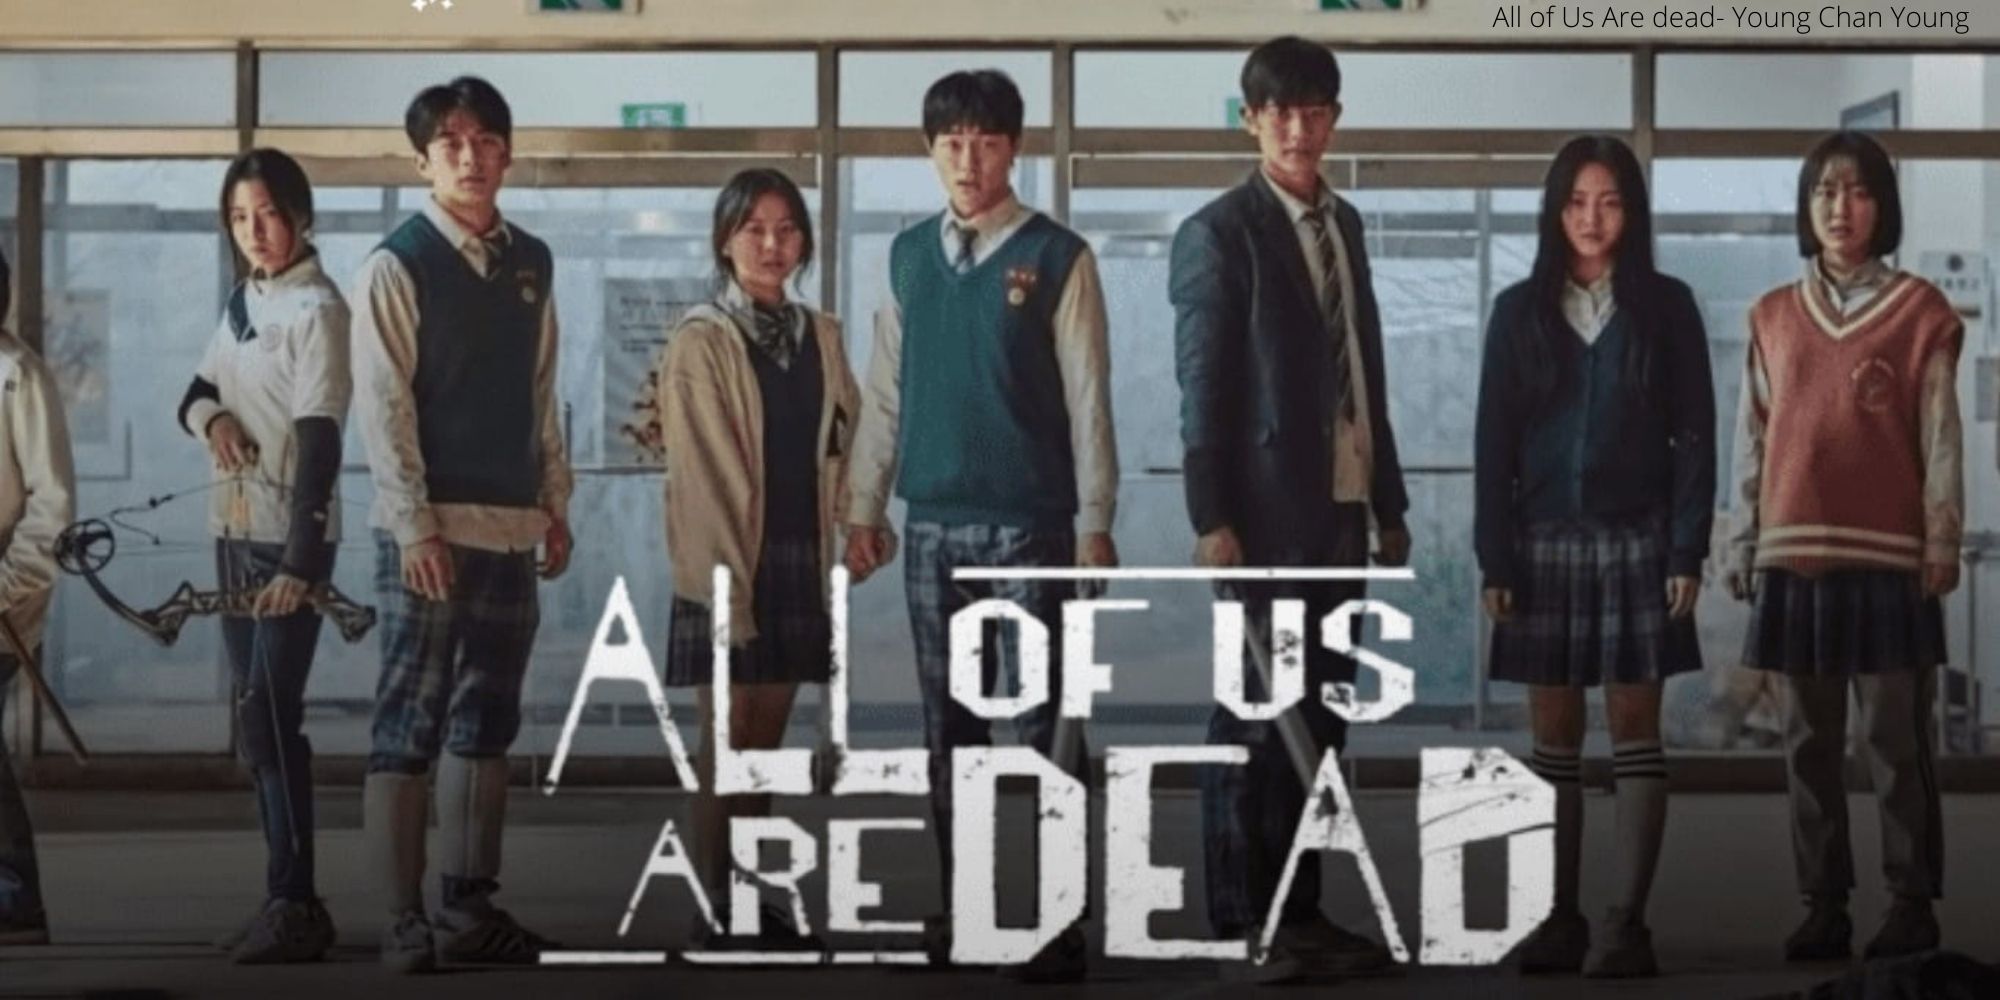 All of Us Are dead- Young Chan Young